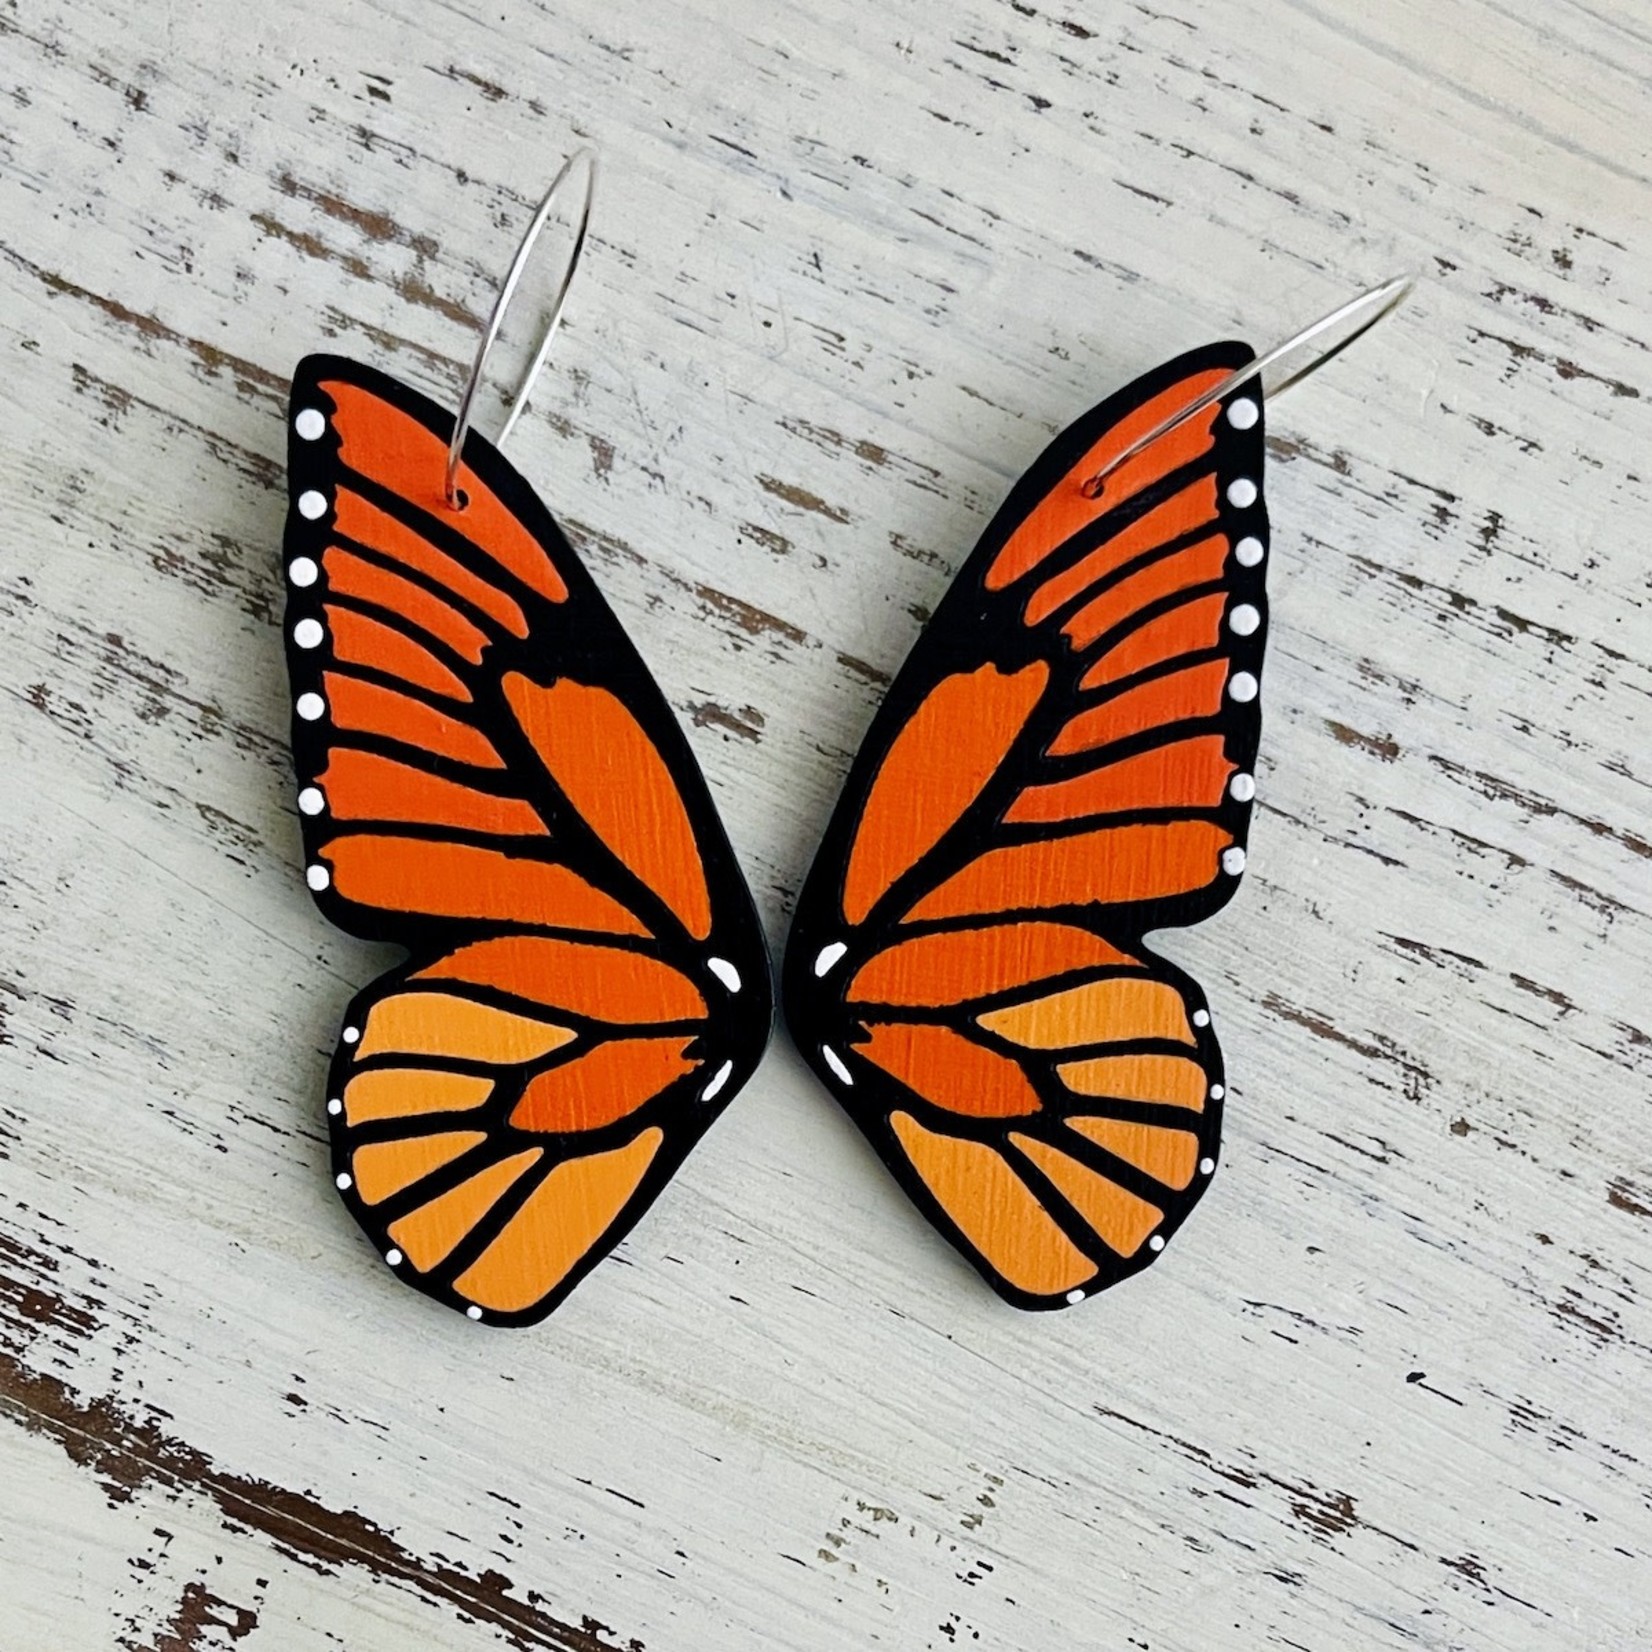 Le Chic Miami c/o Faire Monarch Butterfly Wing Earrings by Le Chic Miami